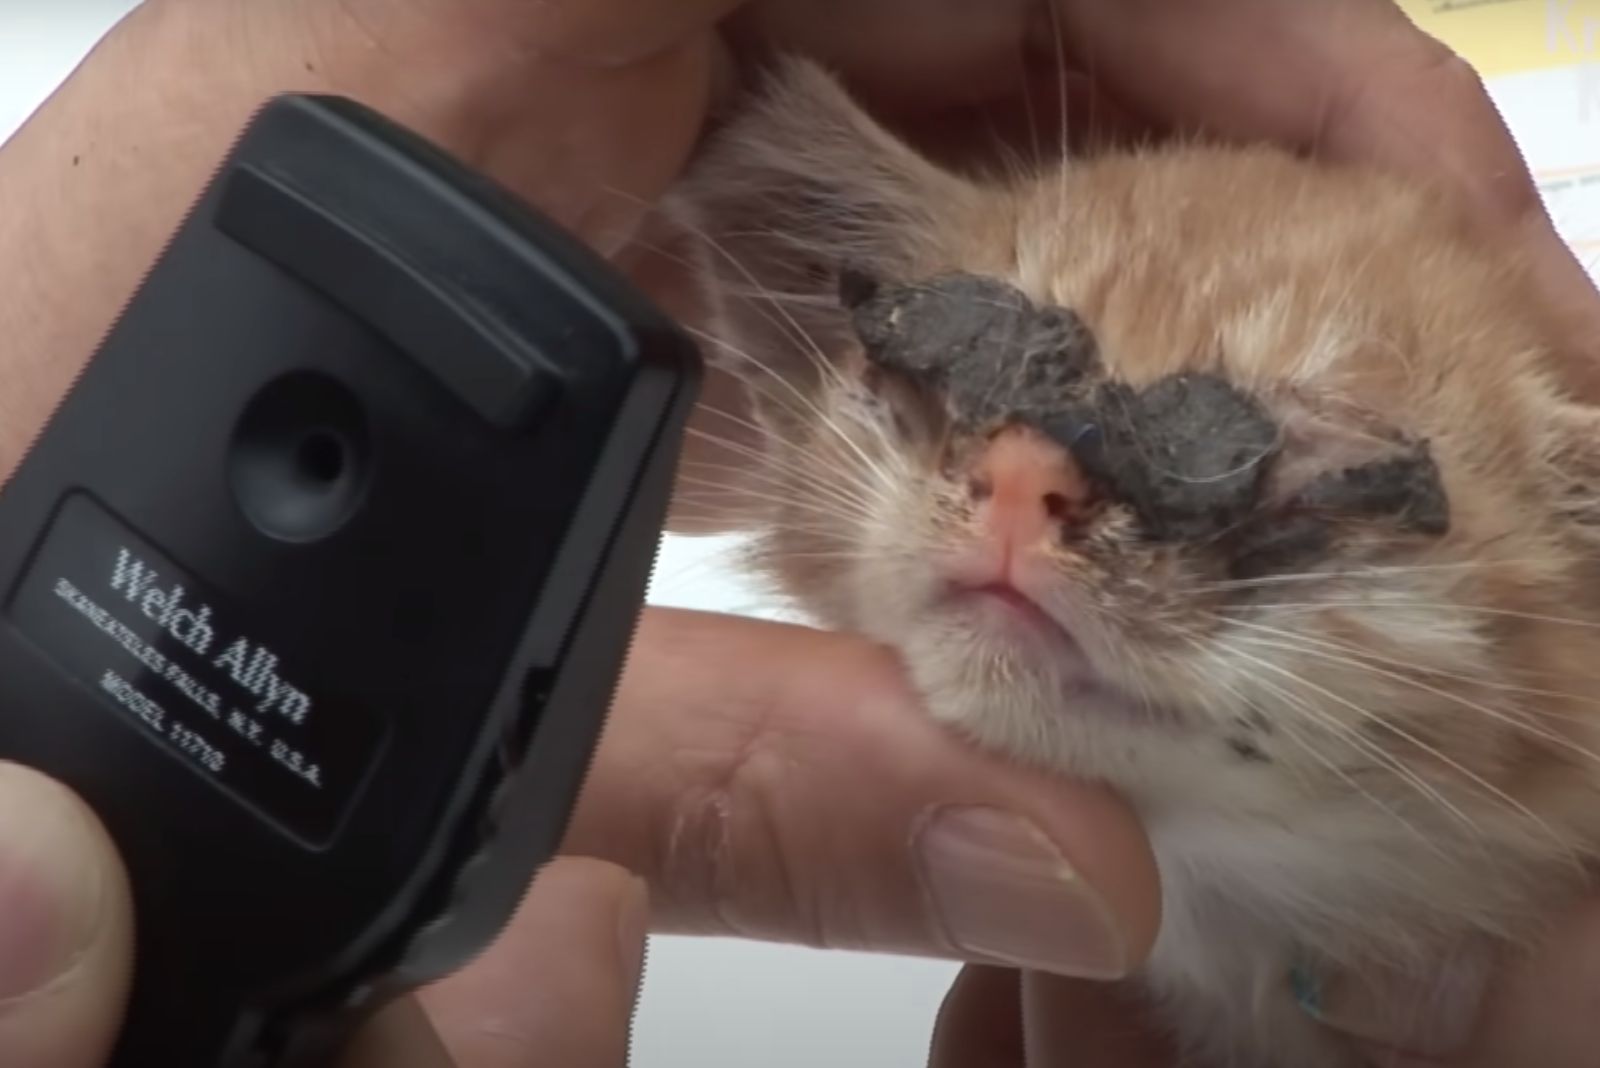 scanning cats eyes covered in mud